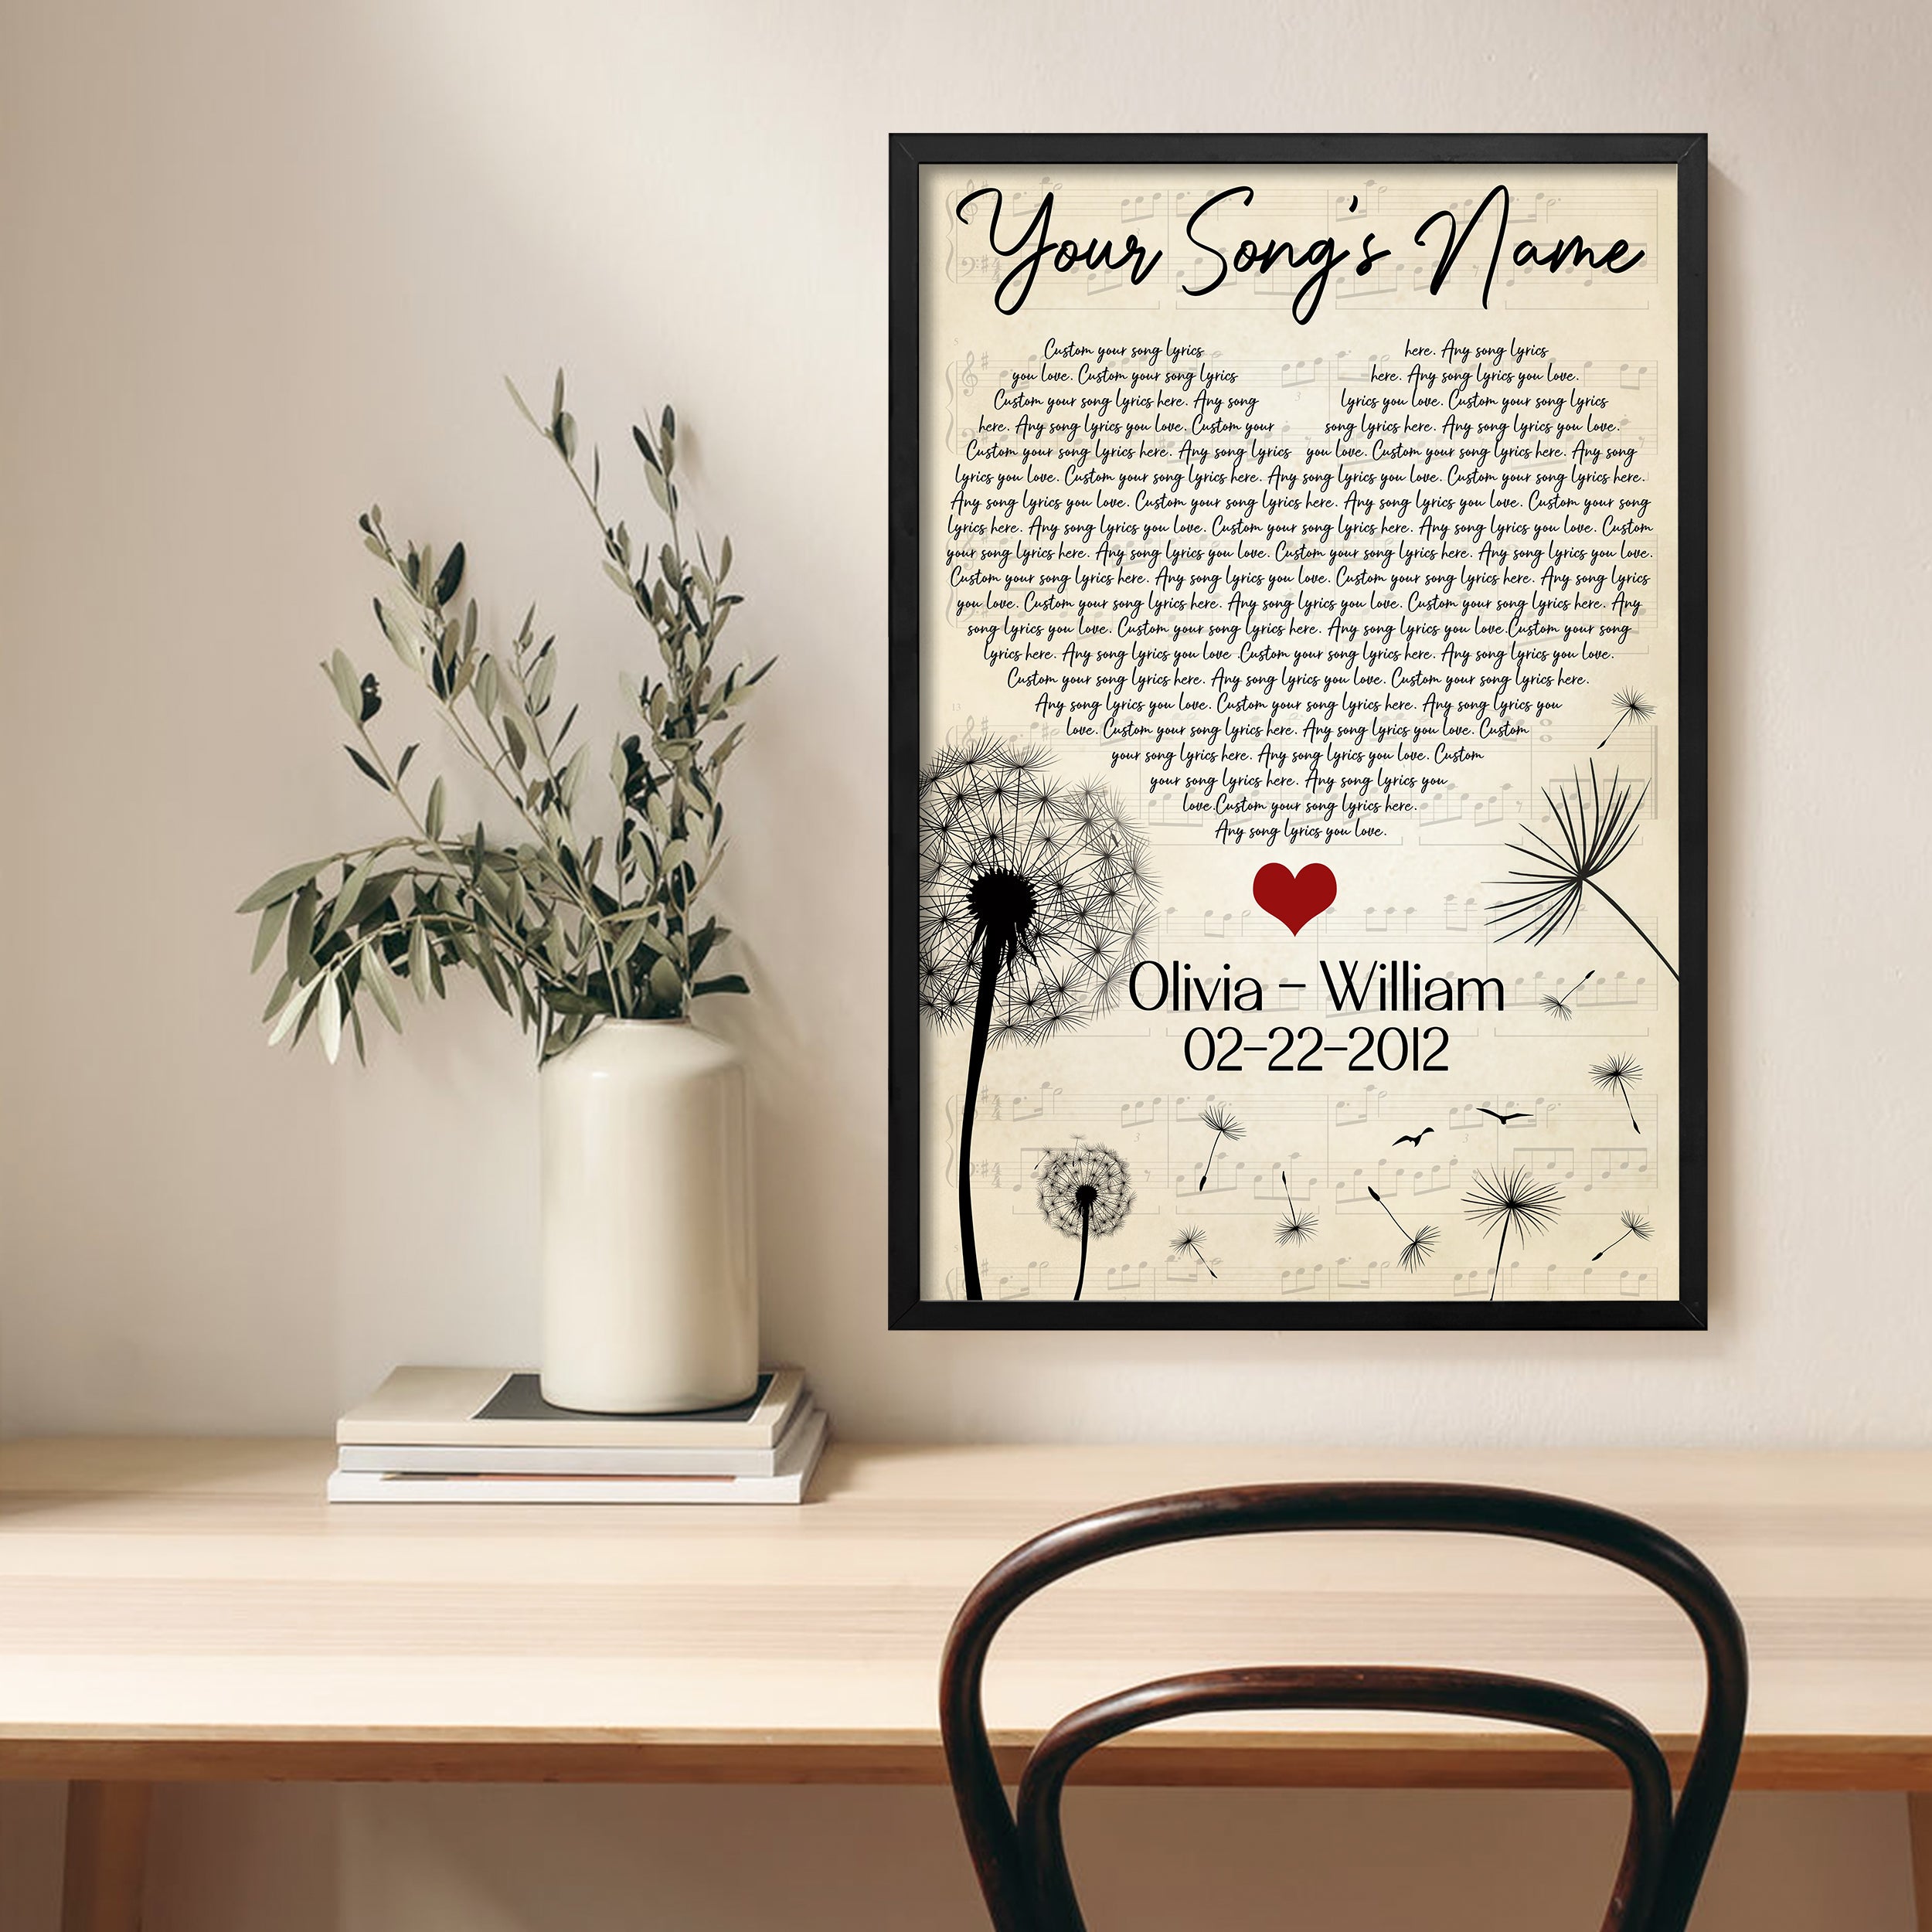 Custom Song Lyrics Canvas Wall Art - Gifts for Him and Her - Personalized Music Poster Wall Hanging Decor - Cool Things for Your Room, Christmas Gifts for Boyfriend, Couples Gifts